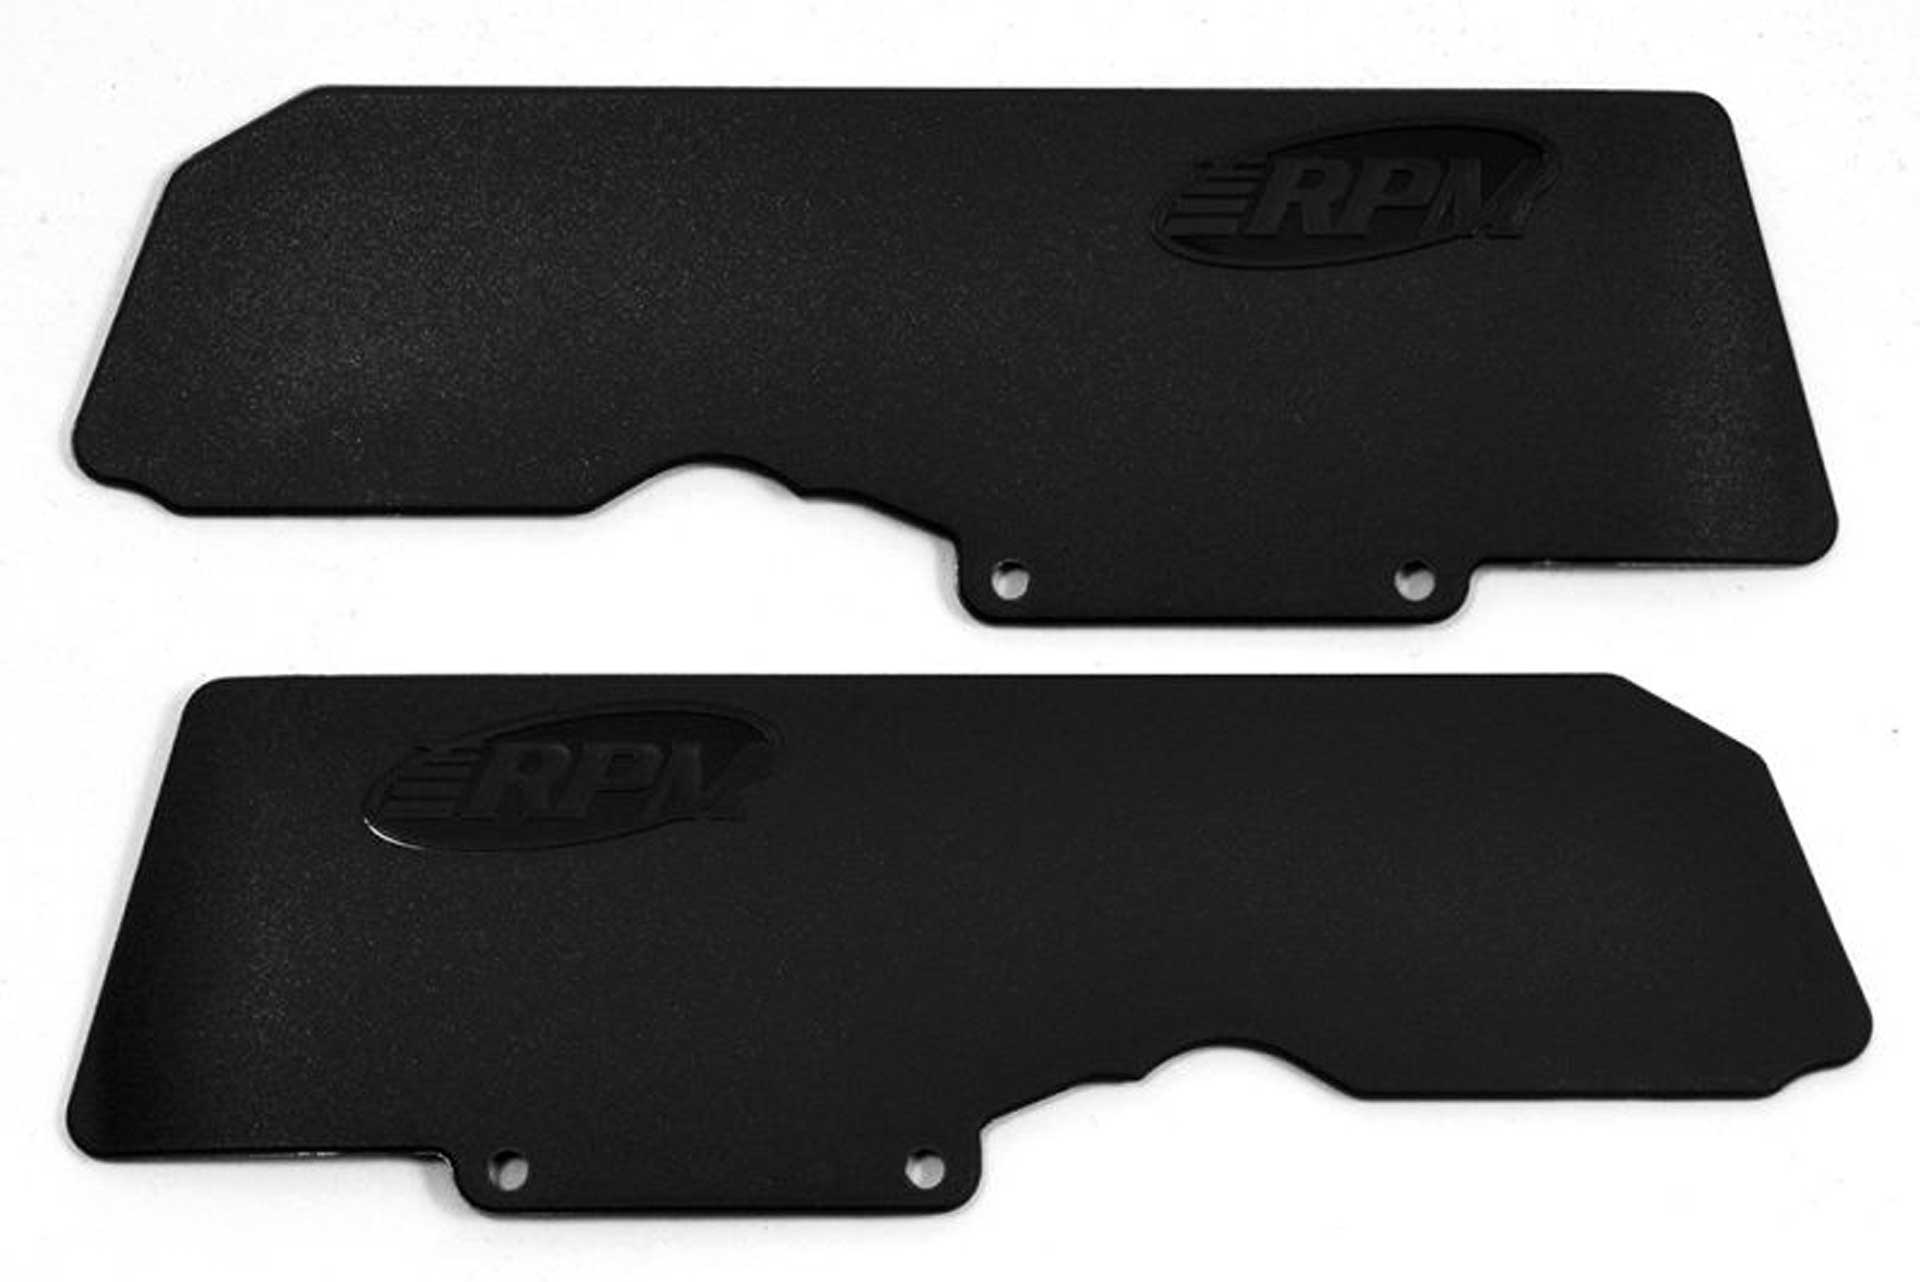 RPM MUD GUARDS BLACK FOR REAR WISHBONE V5/EXB VERSIONS OF 6S ARRMA KRATON / OUTCAST / NOTORIOUS / FIRETEAM / TALION (ONLY SUITABLE FOR RPM CONTROL ARMS)